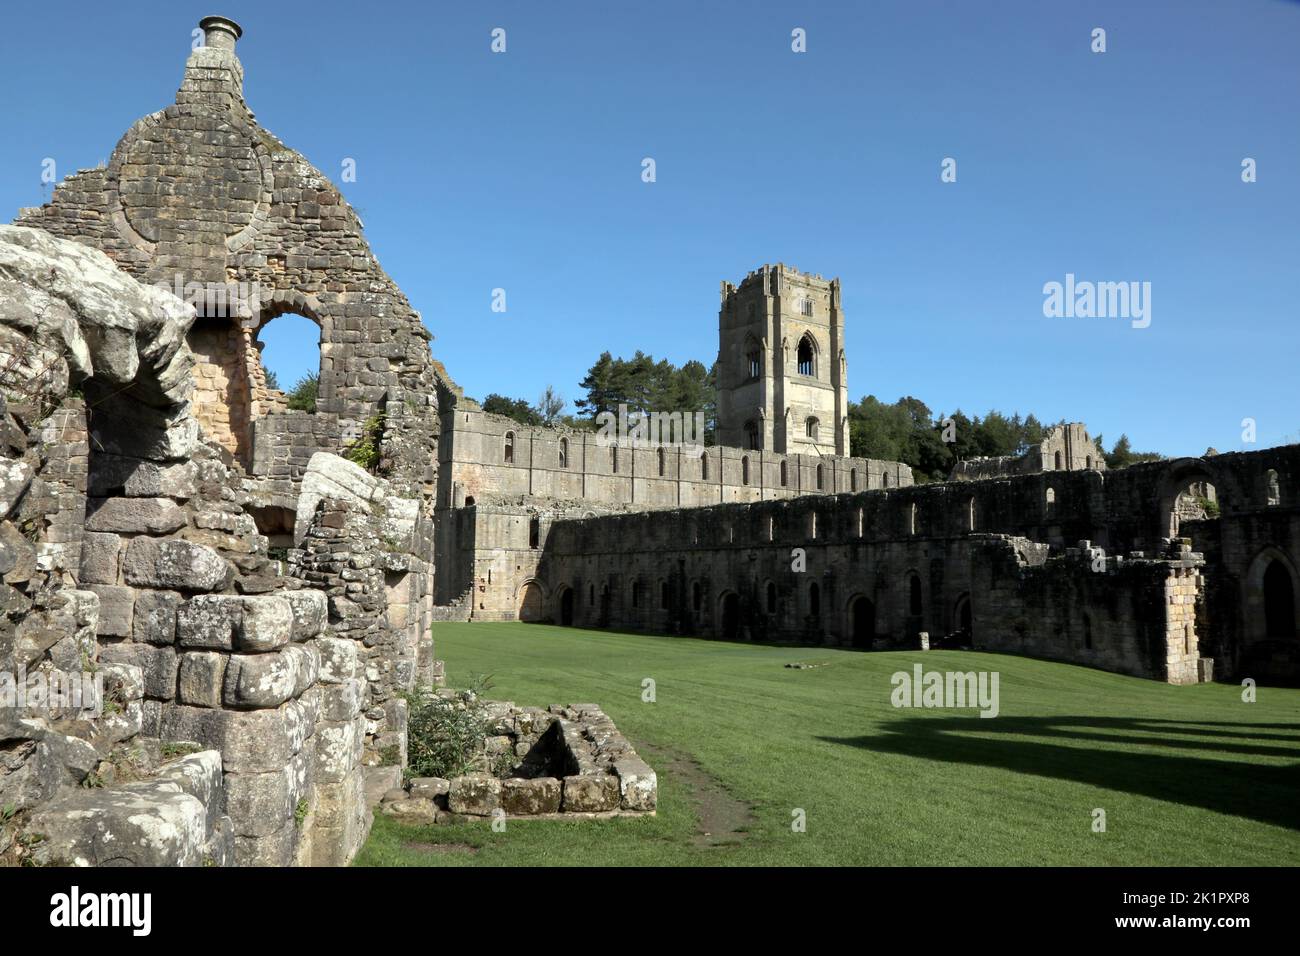 The ruins of Fountains Abbey, a Cistercian monastery near Ripon in North Yorkshire, England, UK. Stock Photo